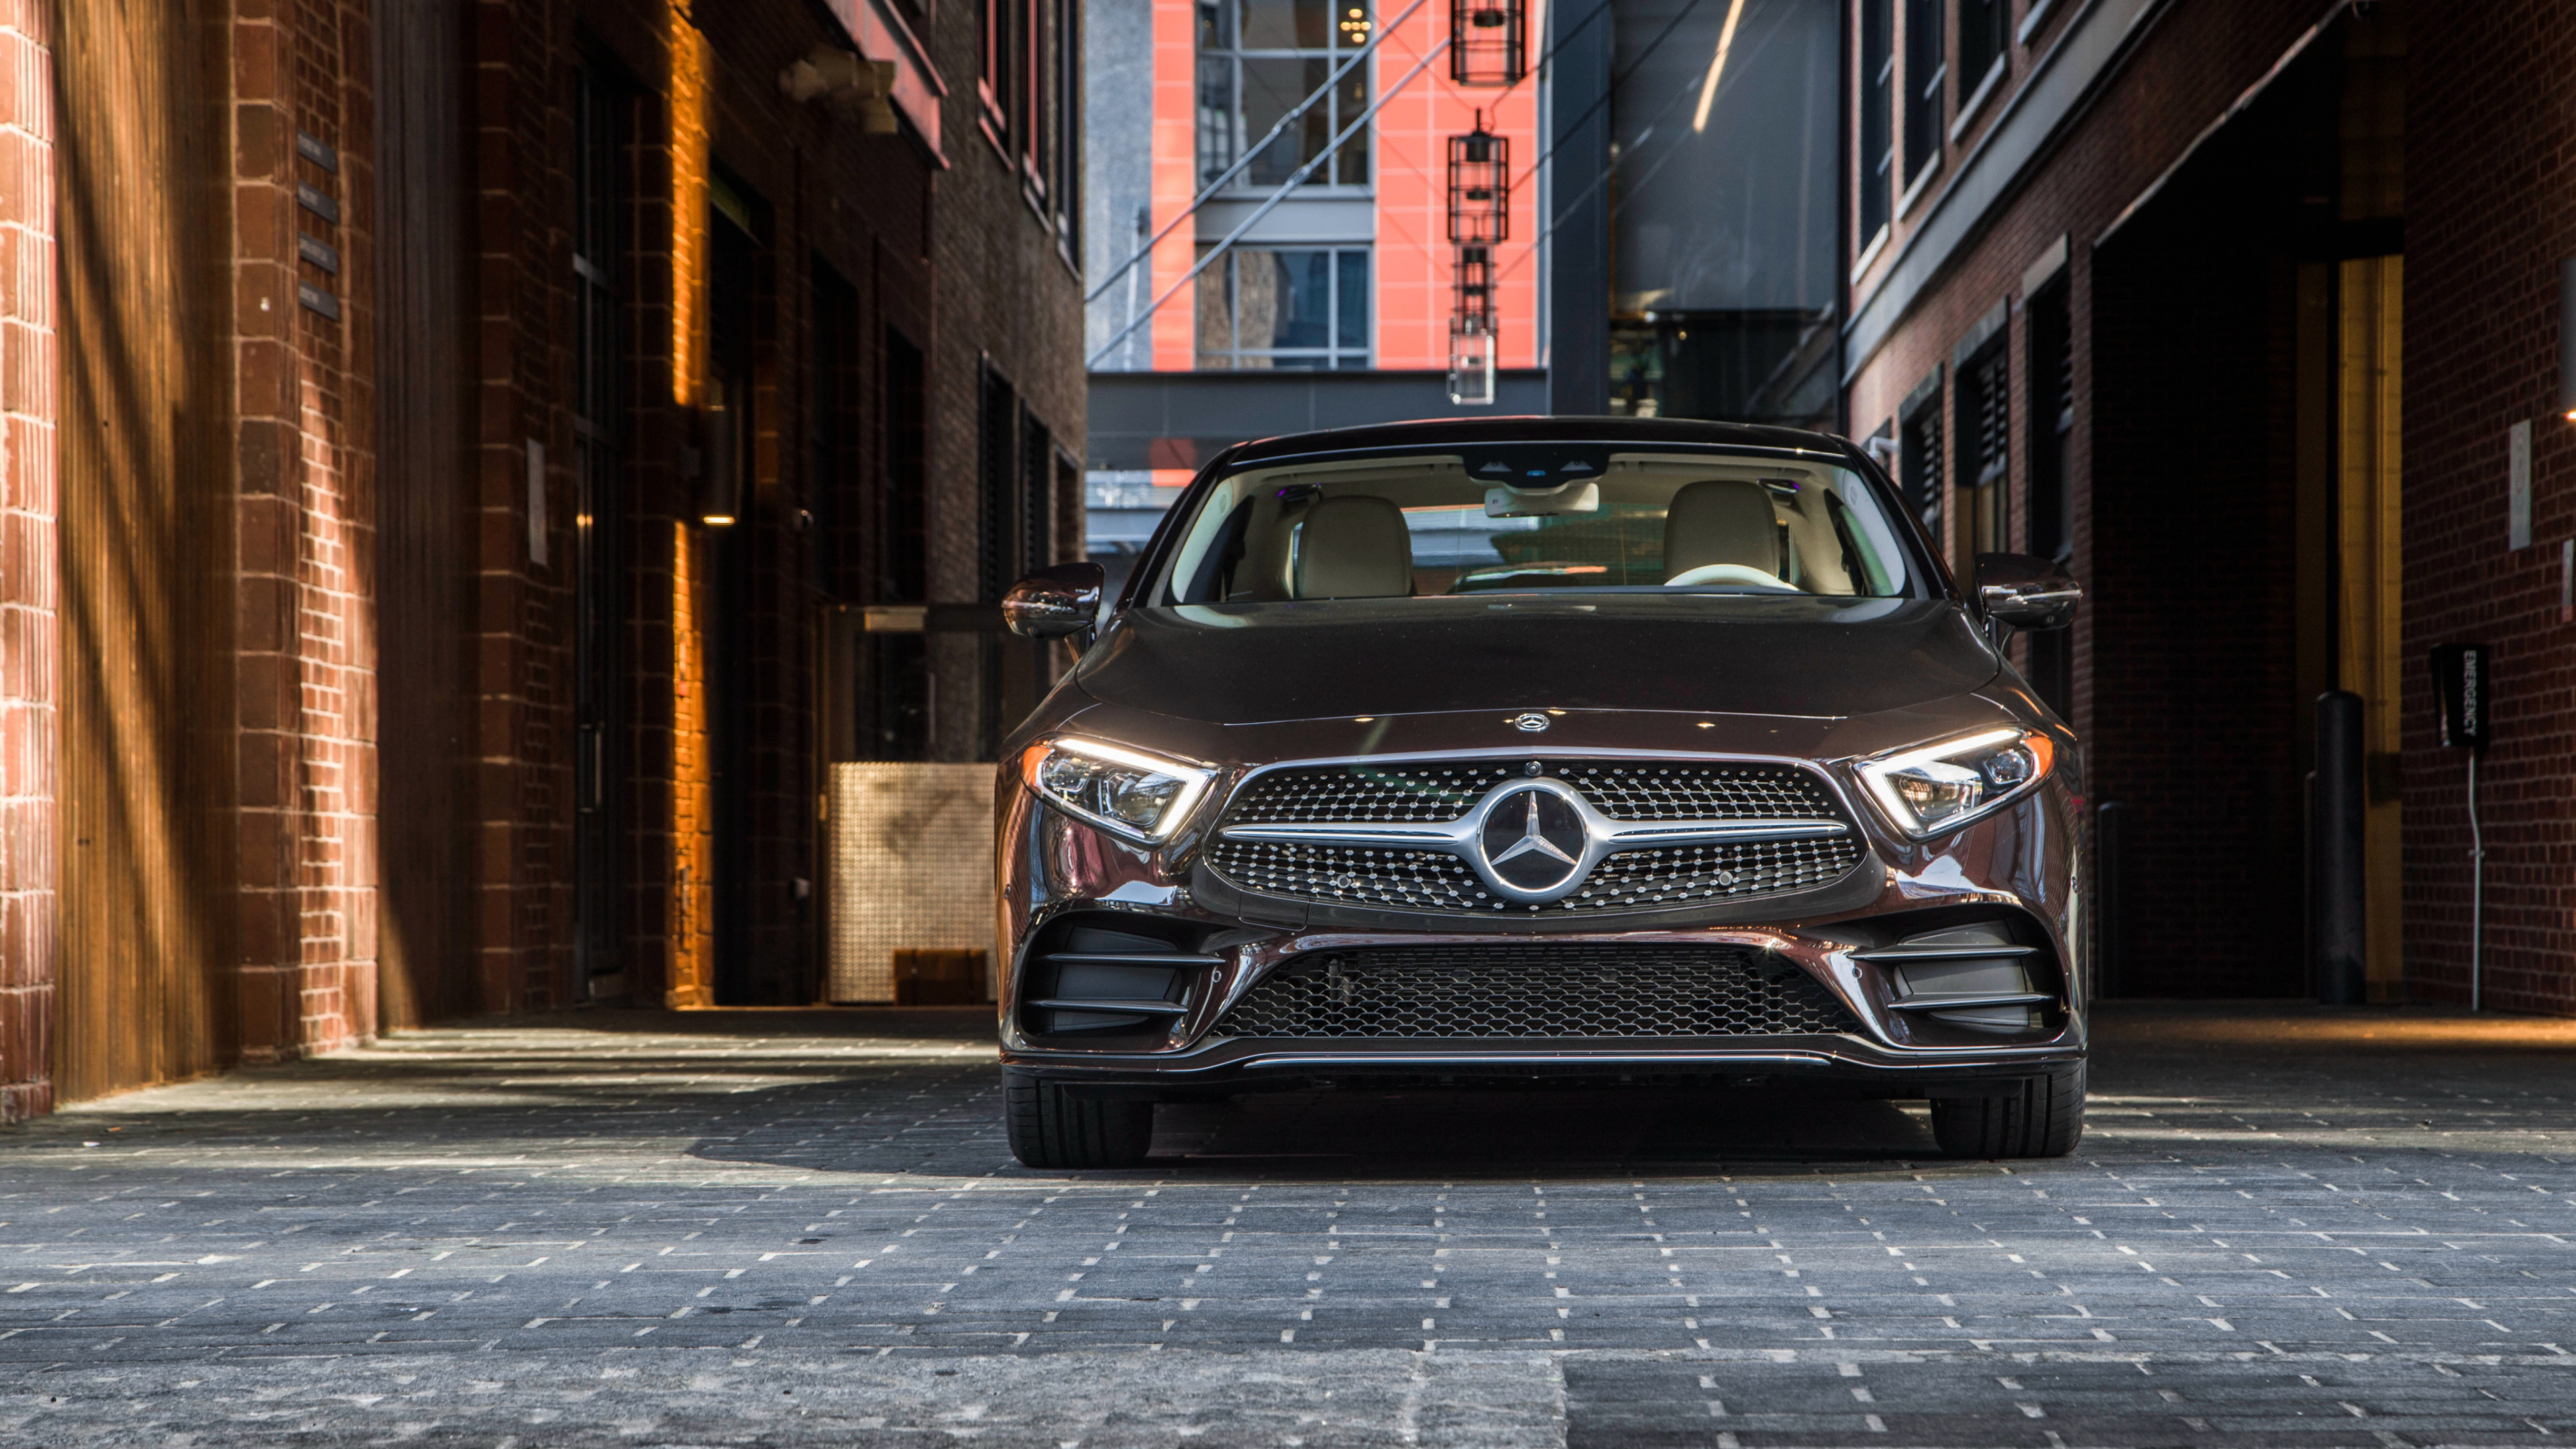 Black Mercedes Benz Car Parked Beside Brown Building During Daytime. Wallpaper in 3840x2160 Resolution